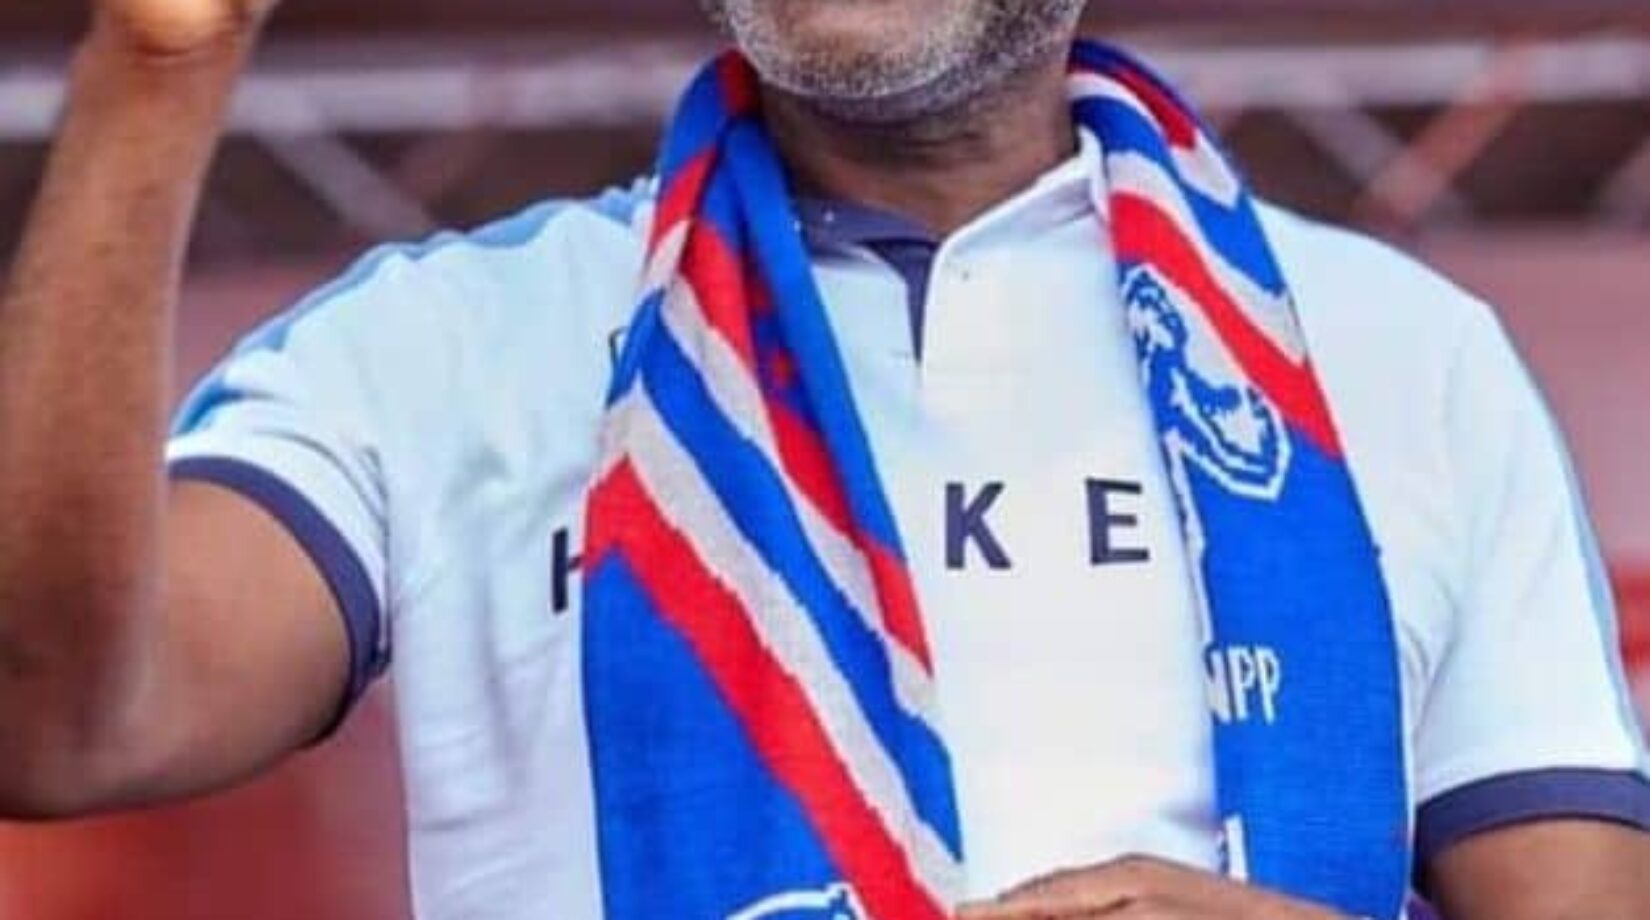 NPP FLAGBEARER ELECTIONS: I’m Still in the Race -Ken Agyapong clears Air